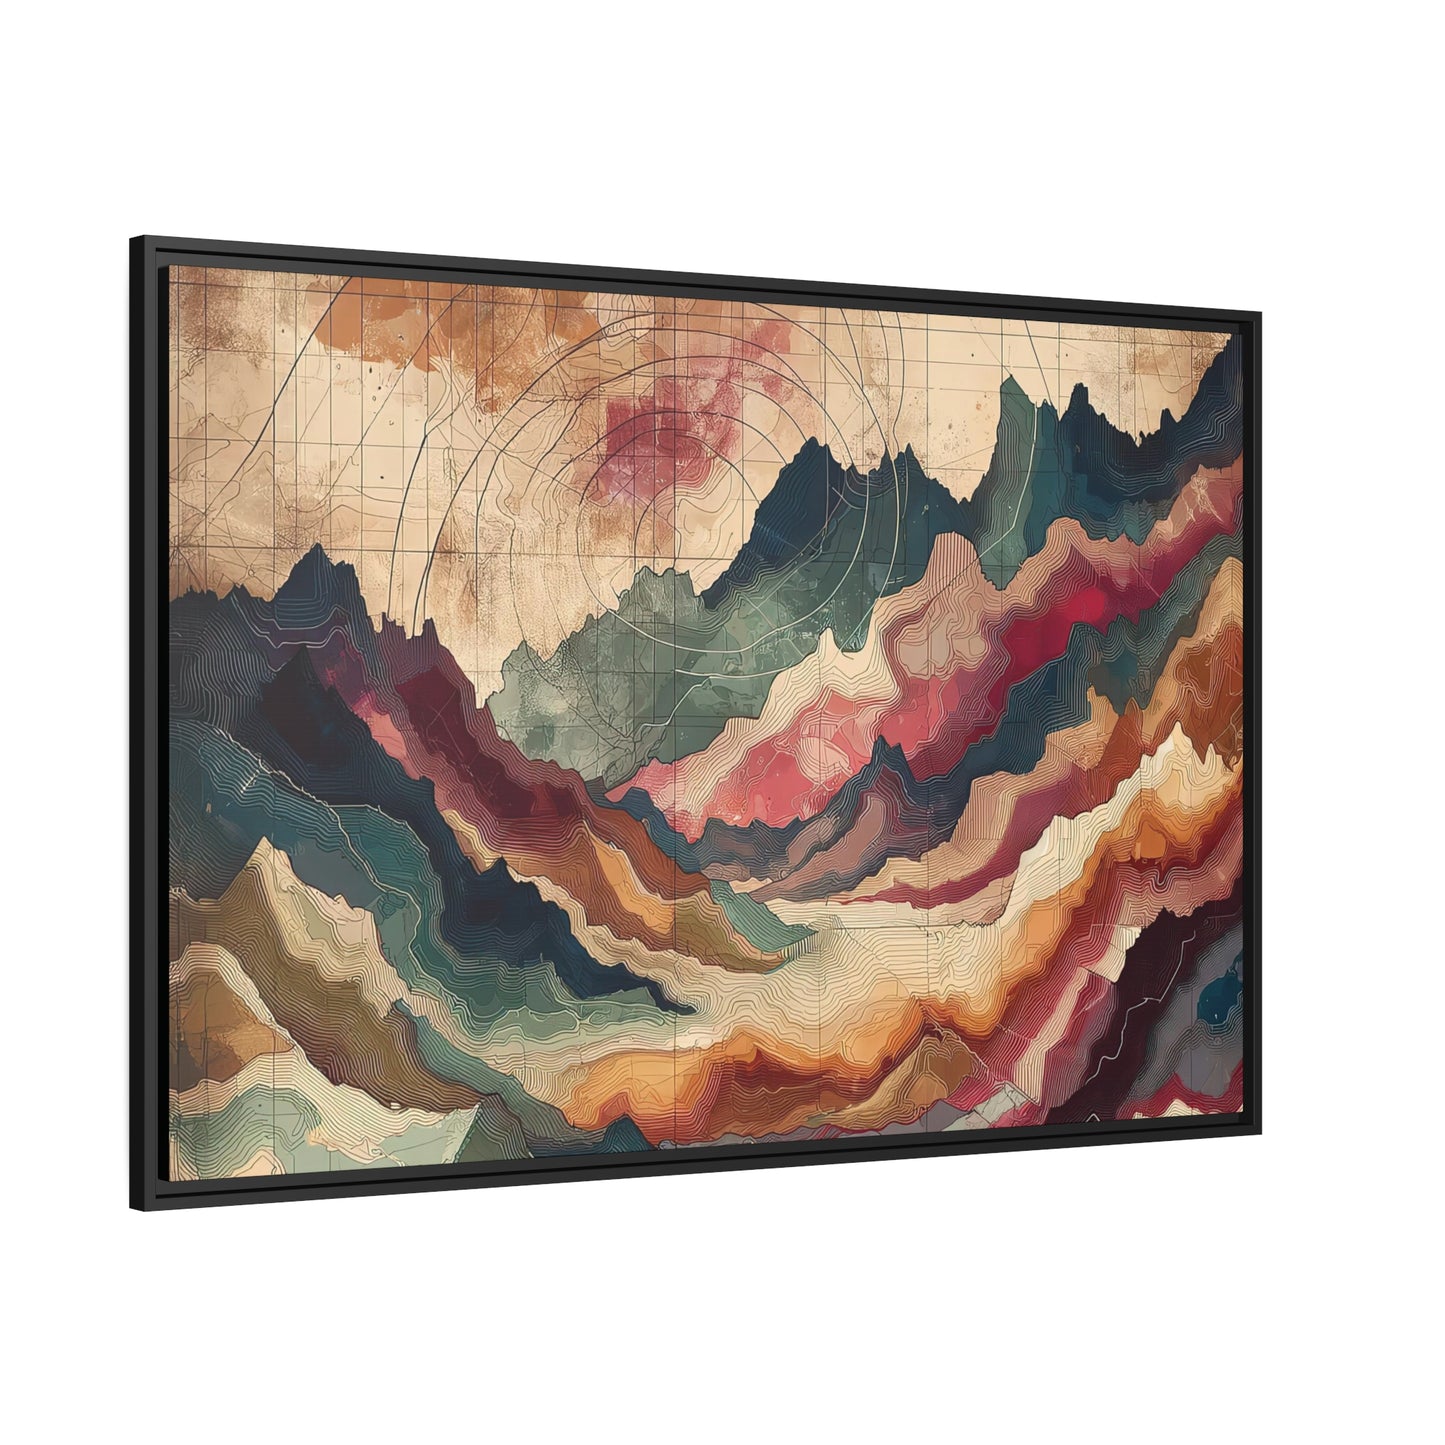 Rugged Mountain Map | Digital Abstract Work of Art | FRAMED CANVAS WRAP